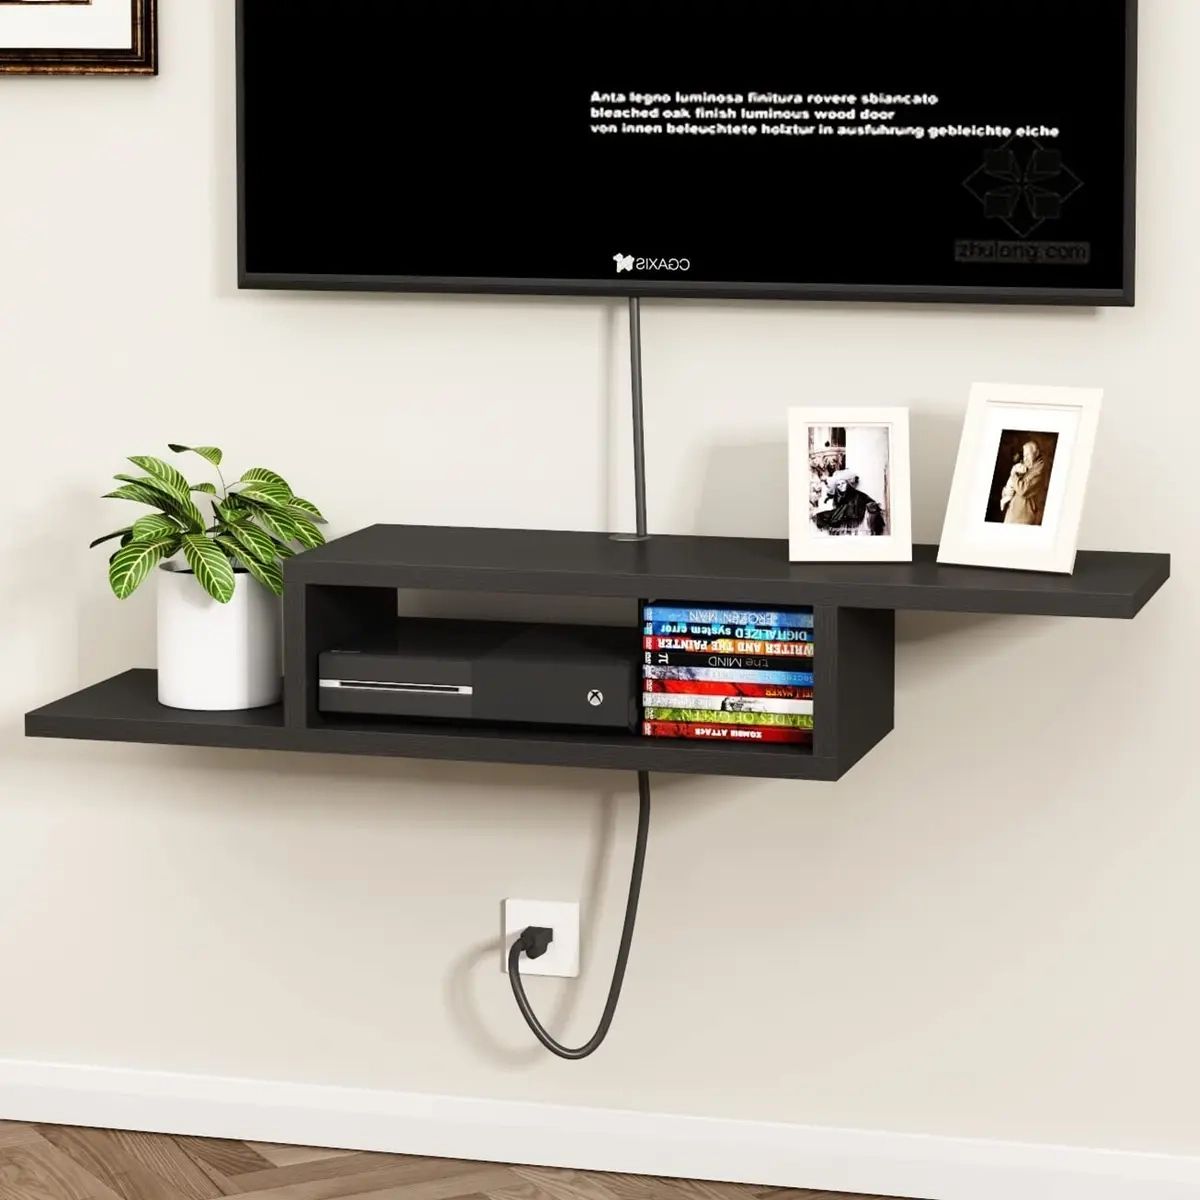 Floating Tv Stand Shelf, Wall Mount Entertainment Center Media | Ebay With Regard To Top Shelf Mount Tv Stands (View 10 of 15)